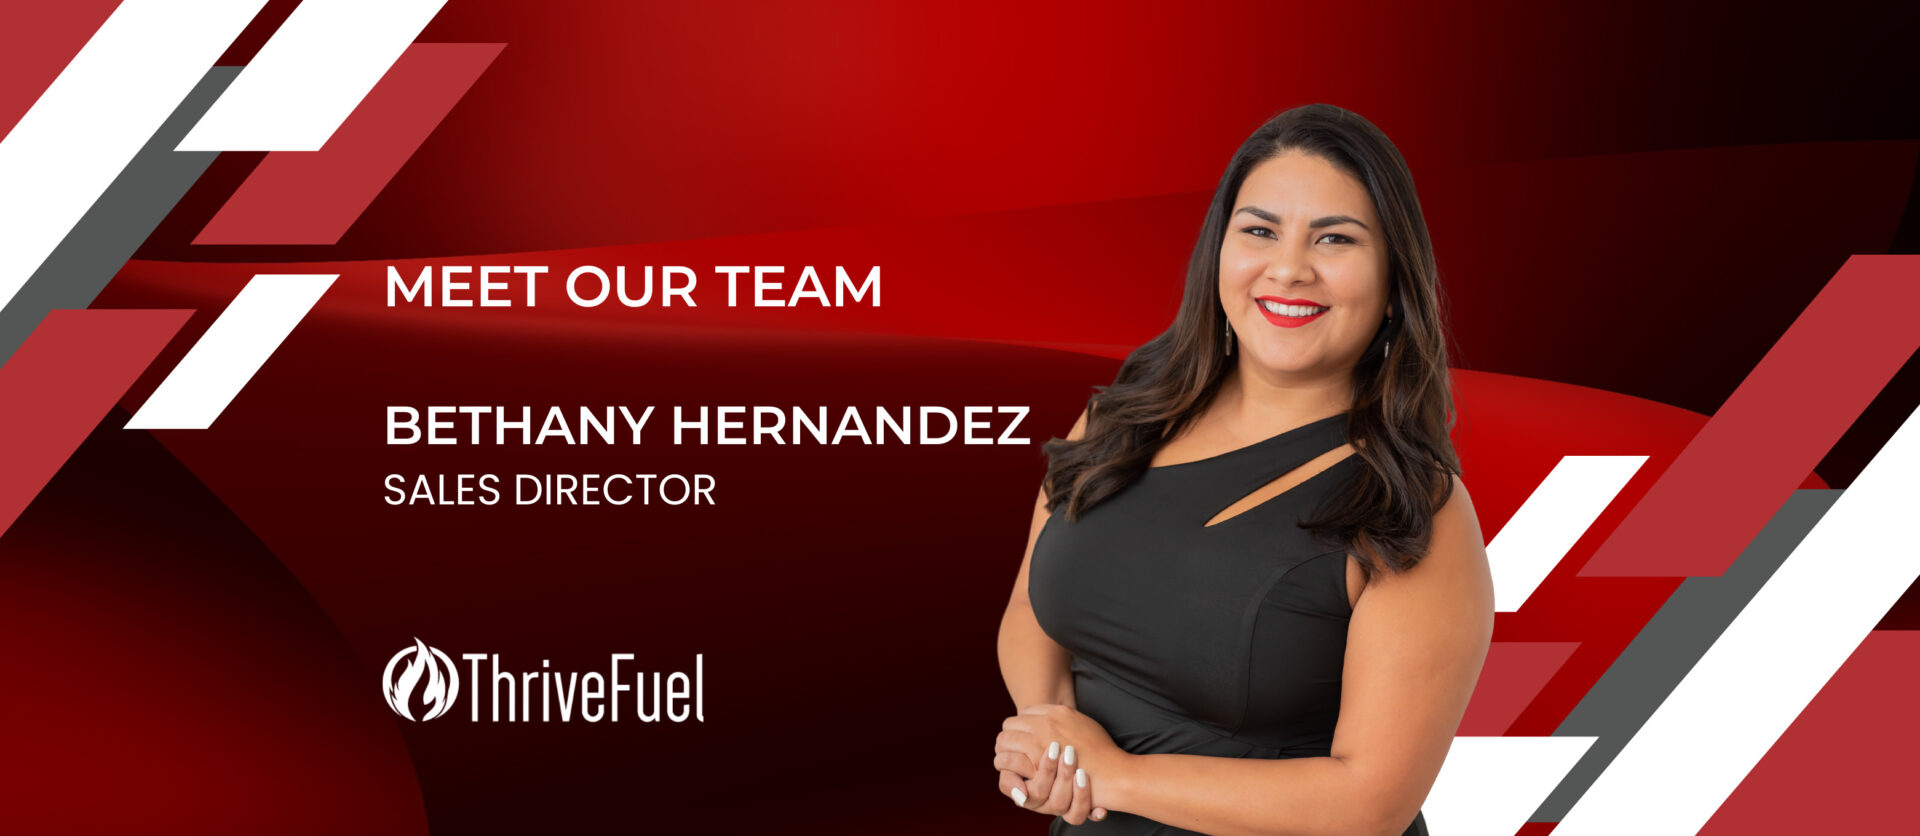 Bethany Hernandez Promoted to Sales Director at ThriveFuel!